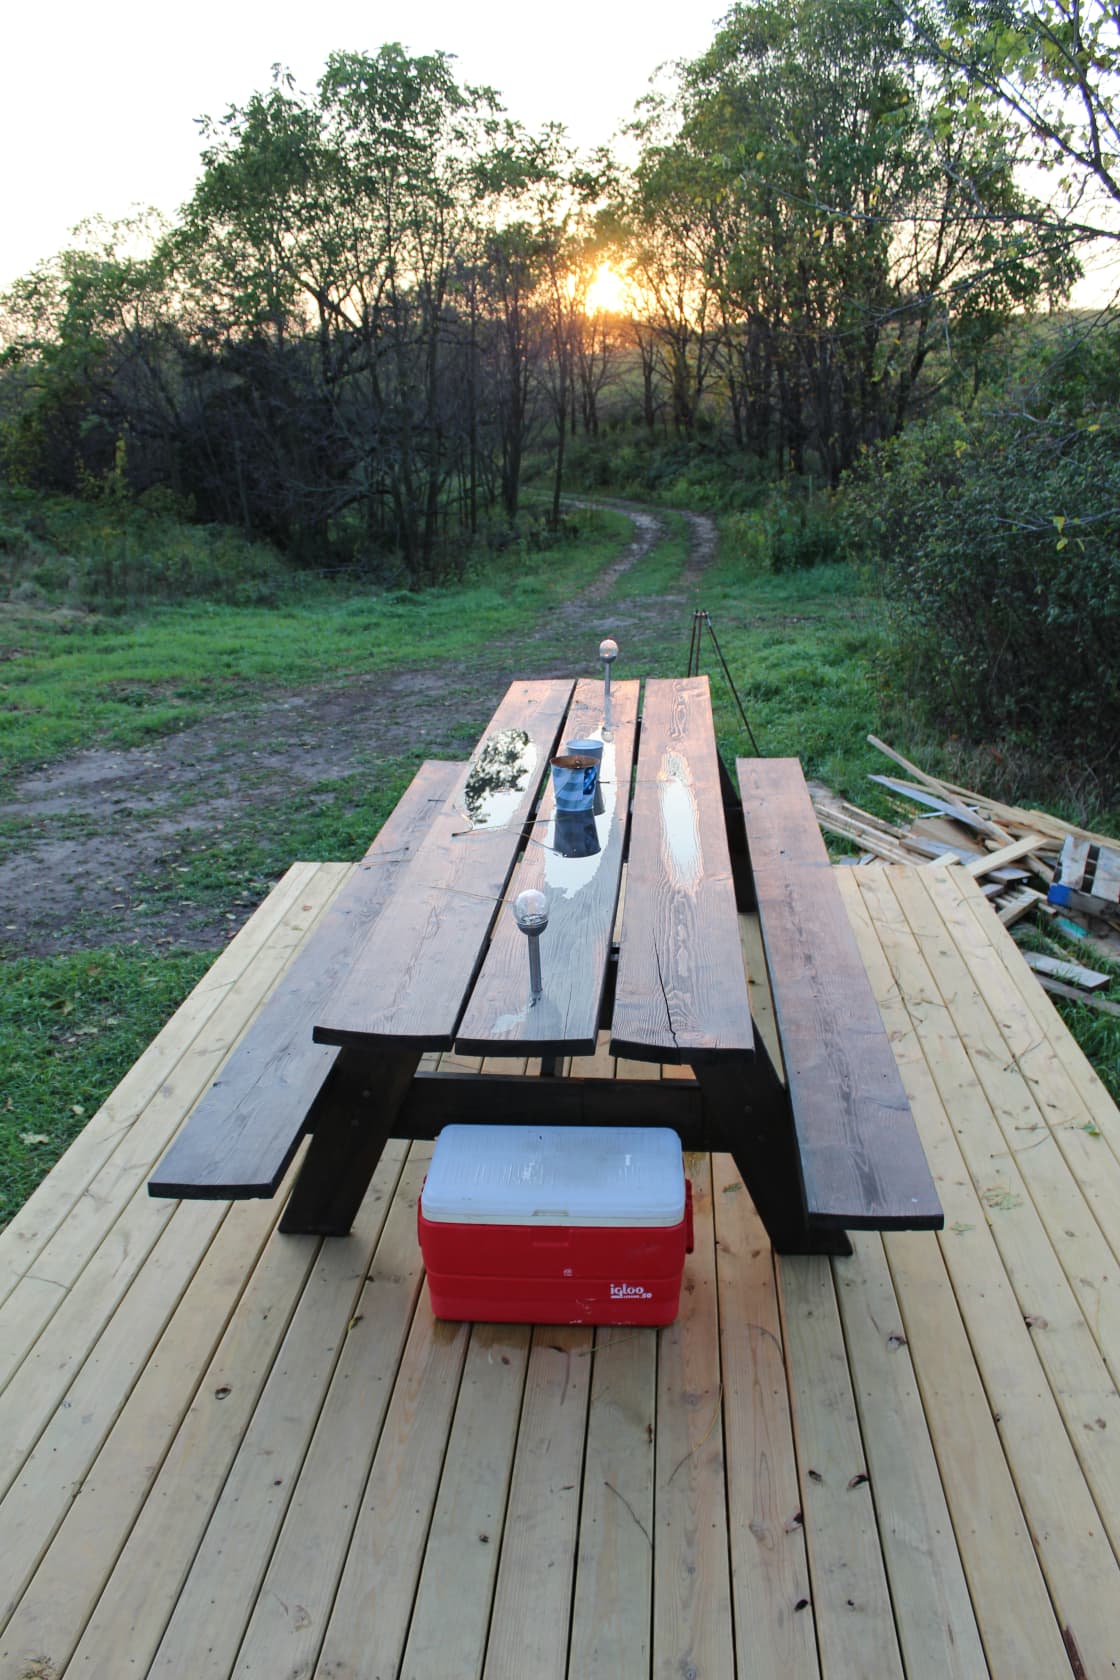 large picnic table for eating outside